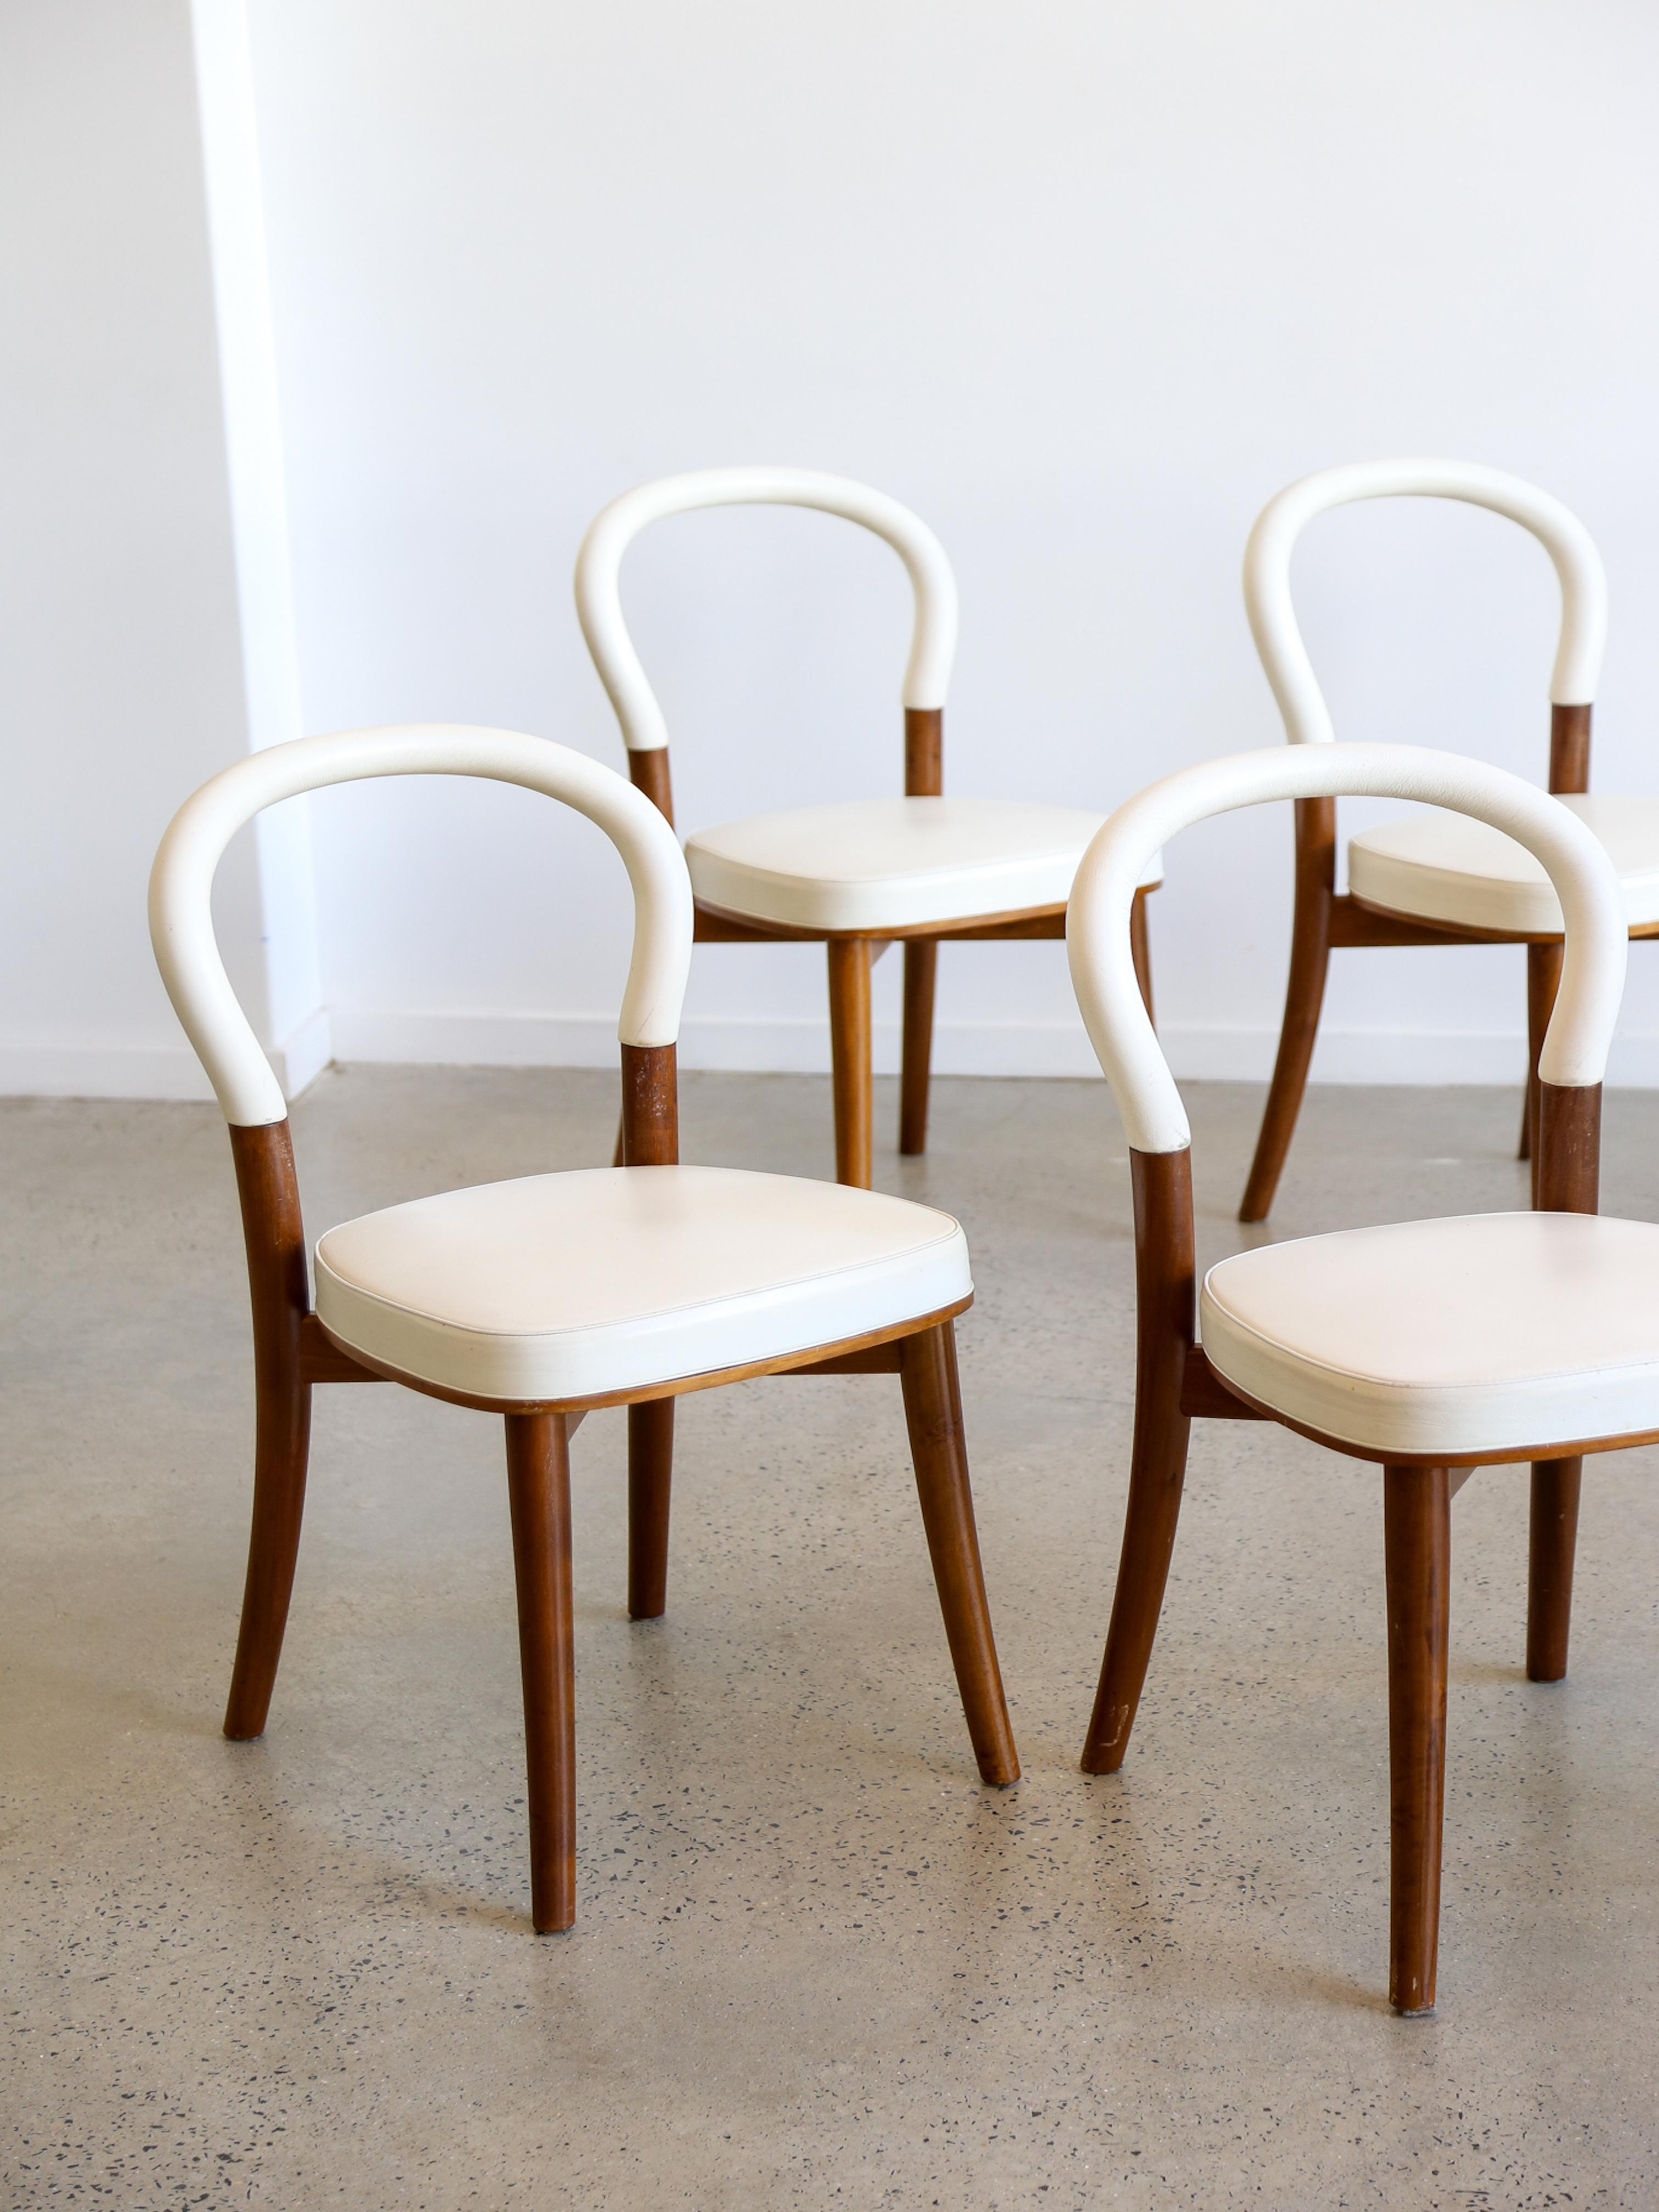 The Göteborg chair is Erik Gunnar Asplund’s poetic interpretation of Rationalist ideas. The chair was commissioned for the extension of the Town Hall in Göteborg, Sweden, whose warm, wood-panelled rooms are evoked in its ashwood frame. The curved